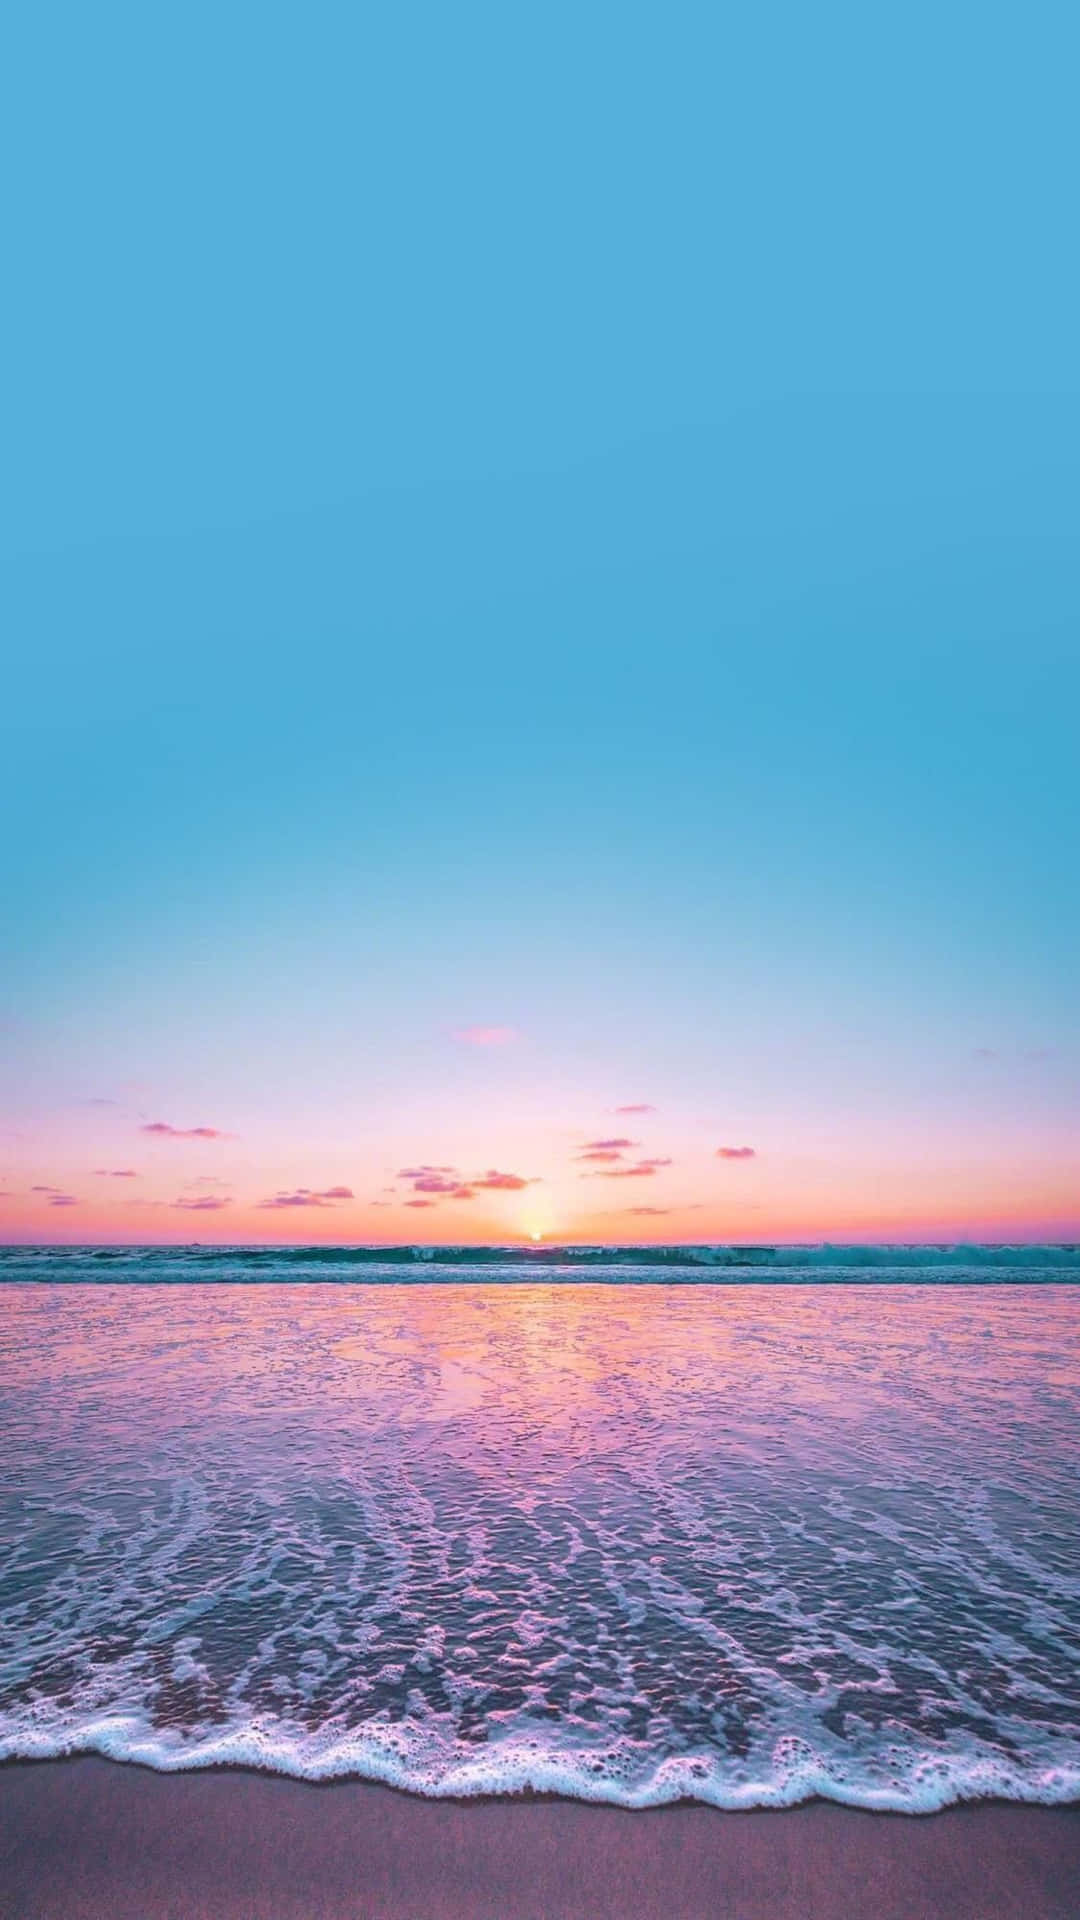 A beautiful pink and blue aesthetic wallpaper Wallpaper